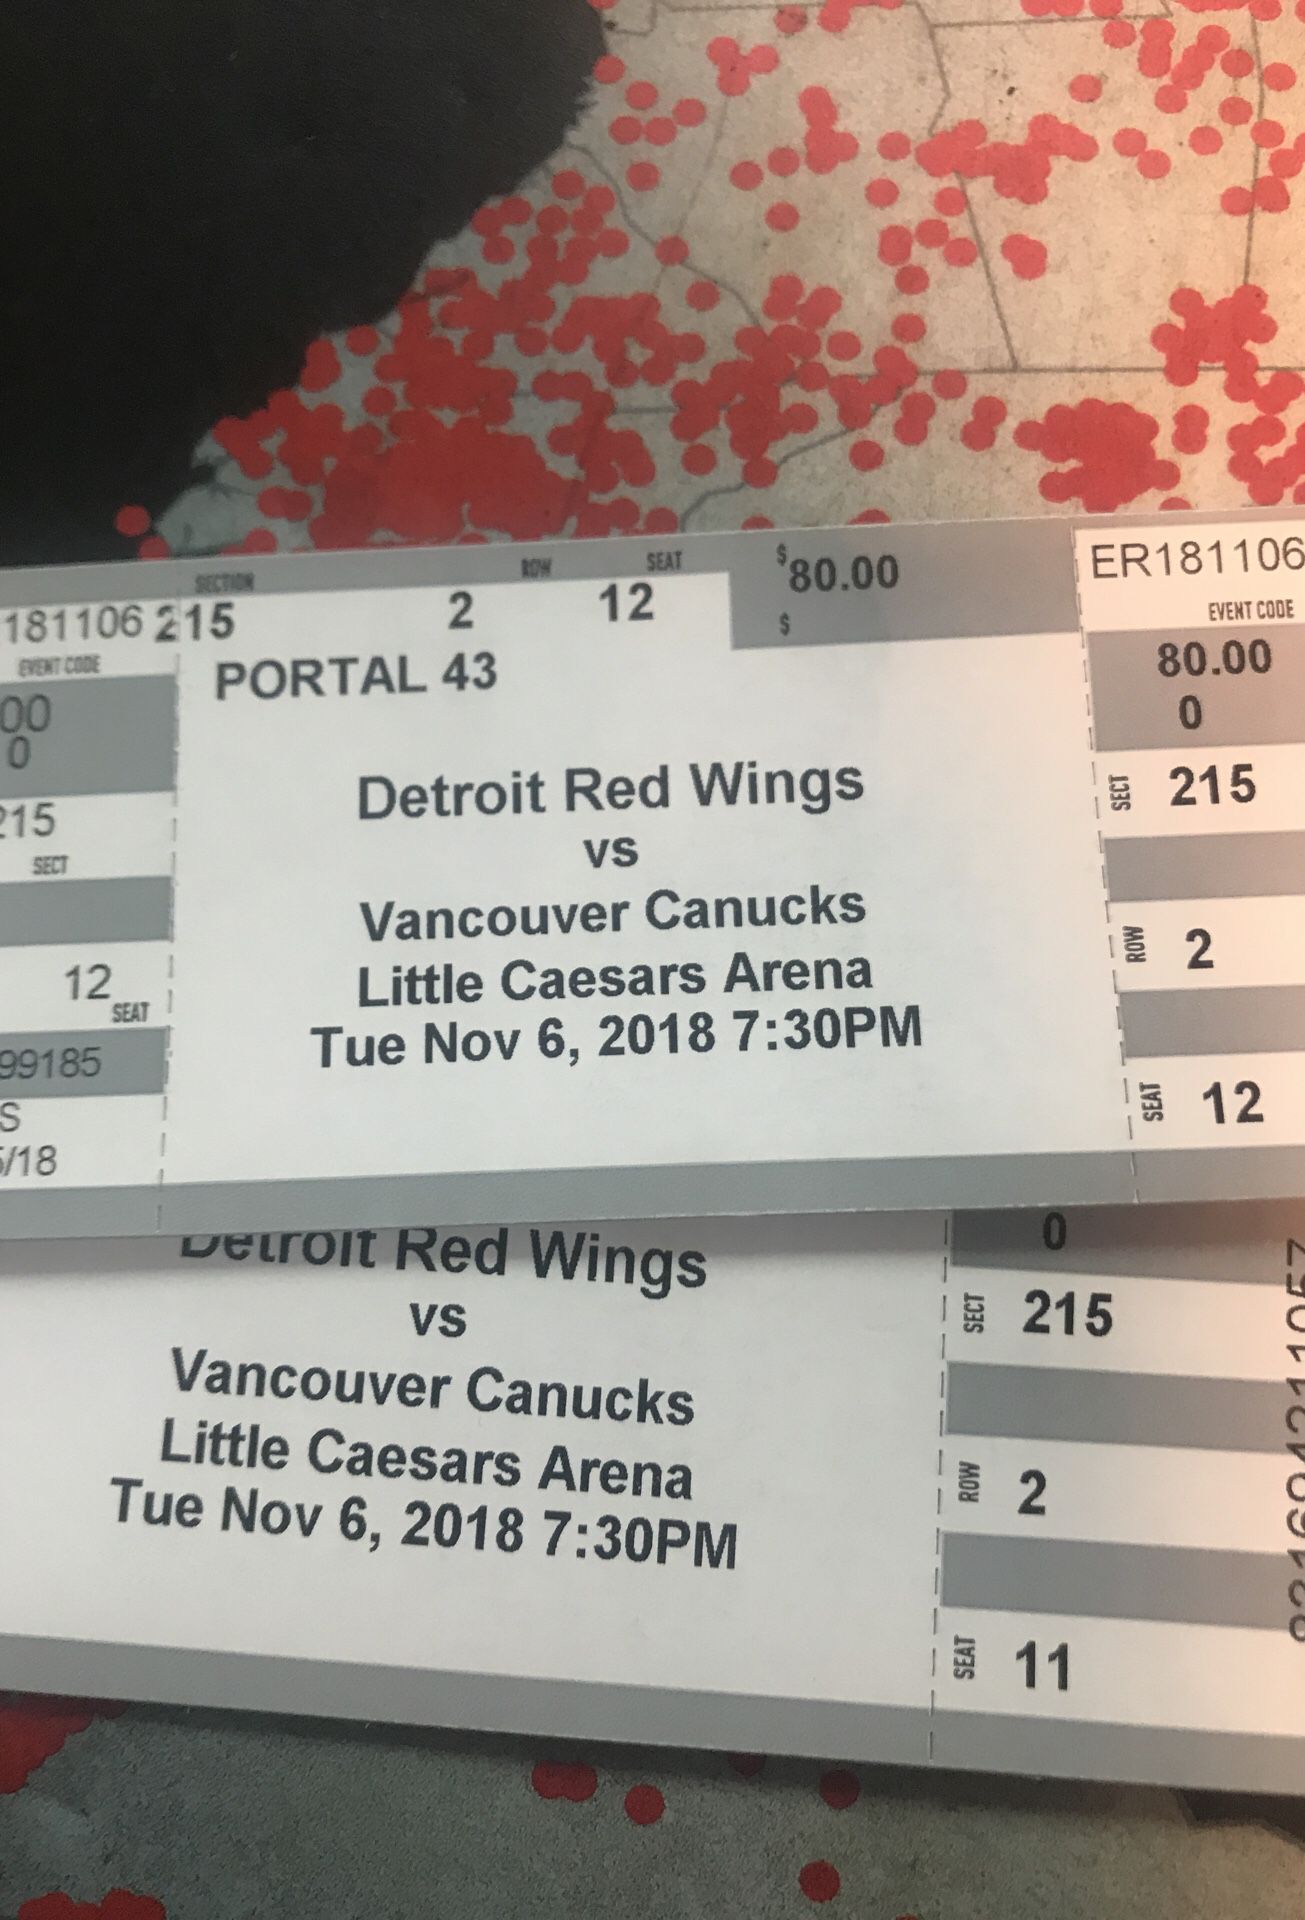 Got 2 tickets for tonight’s game